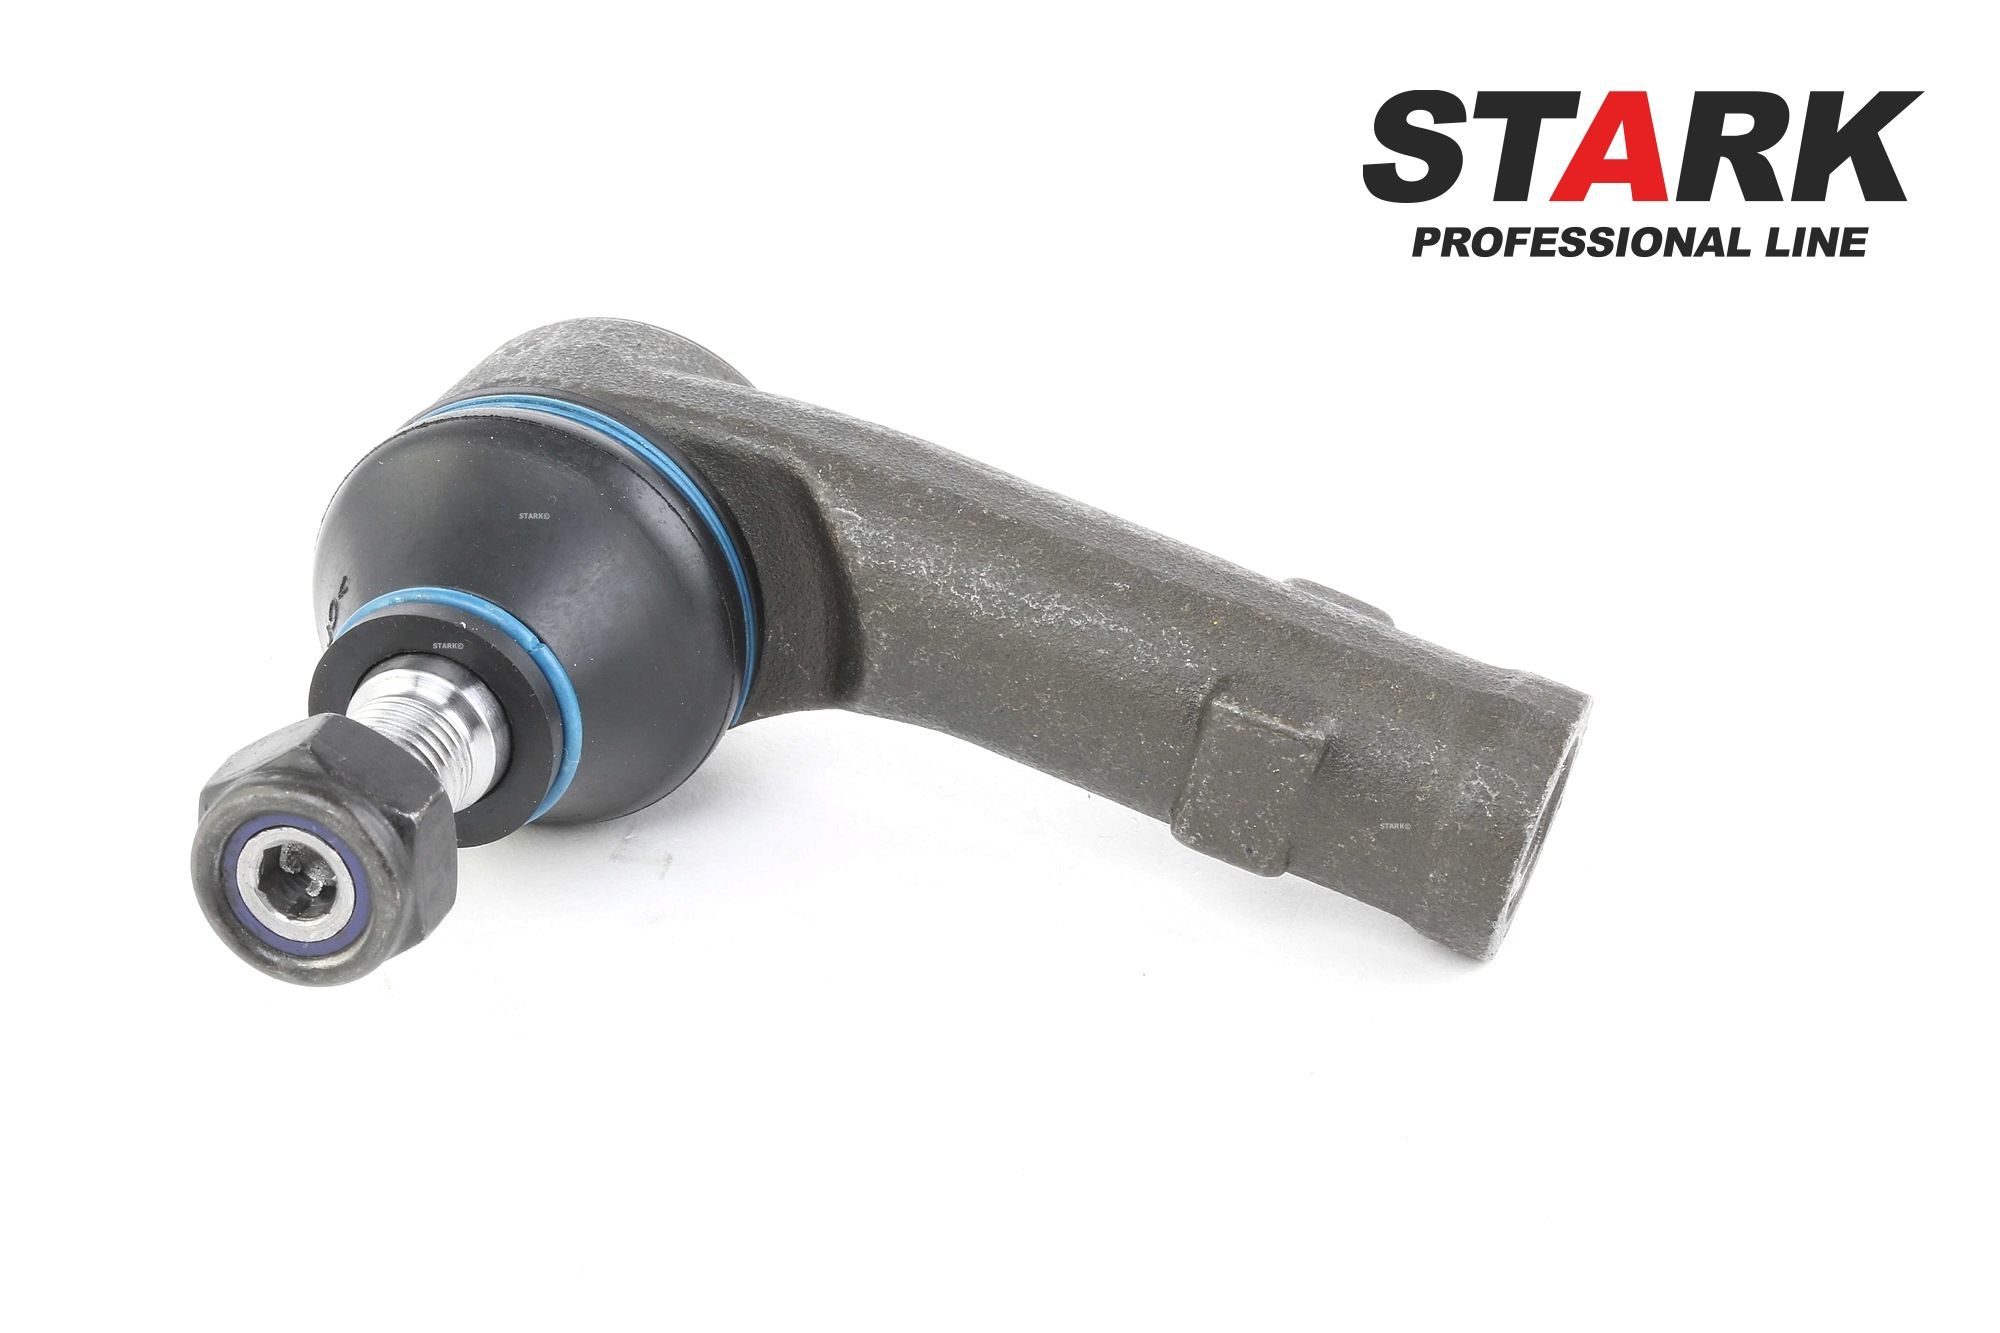 STARK SKTE-0280158 Track rod end Cone Size 13,3 mm, M12X1.5, Front Axle, Left, outer